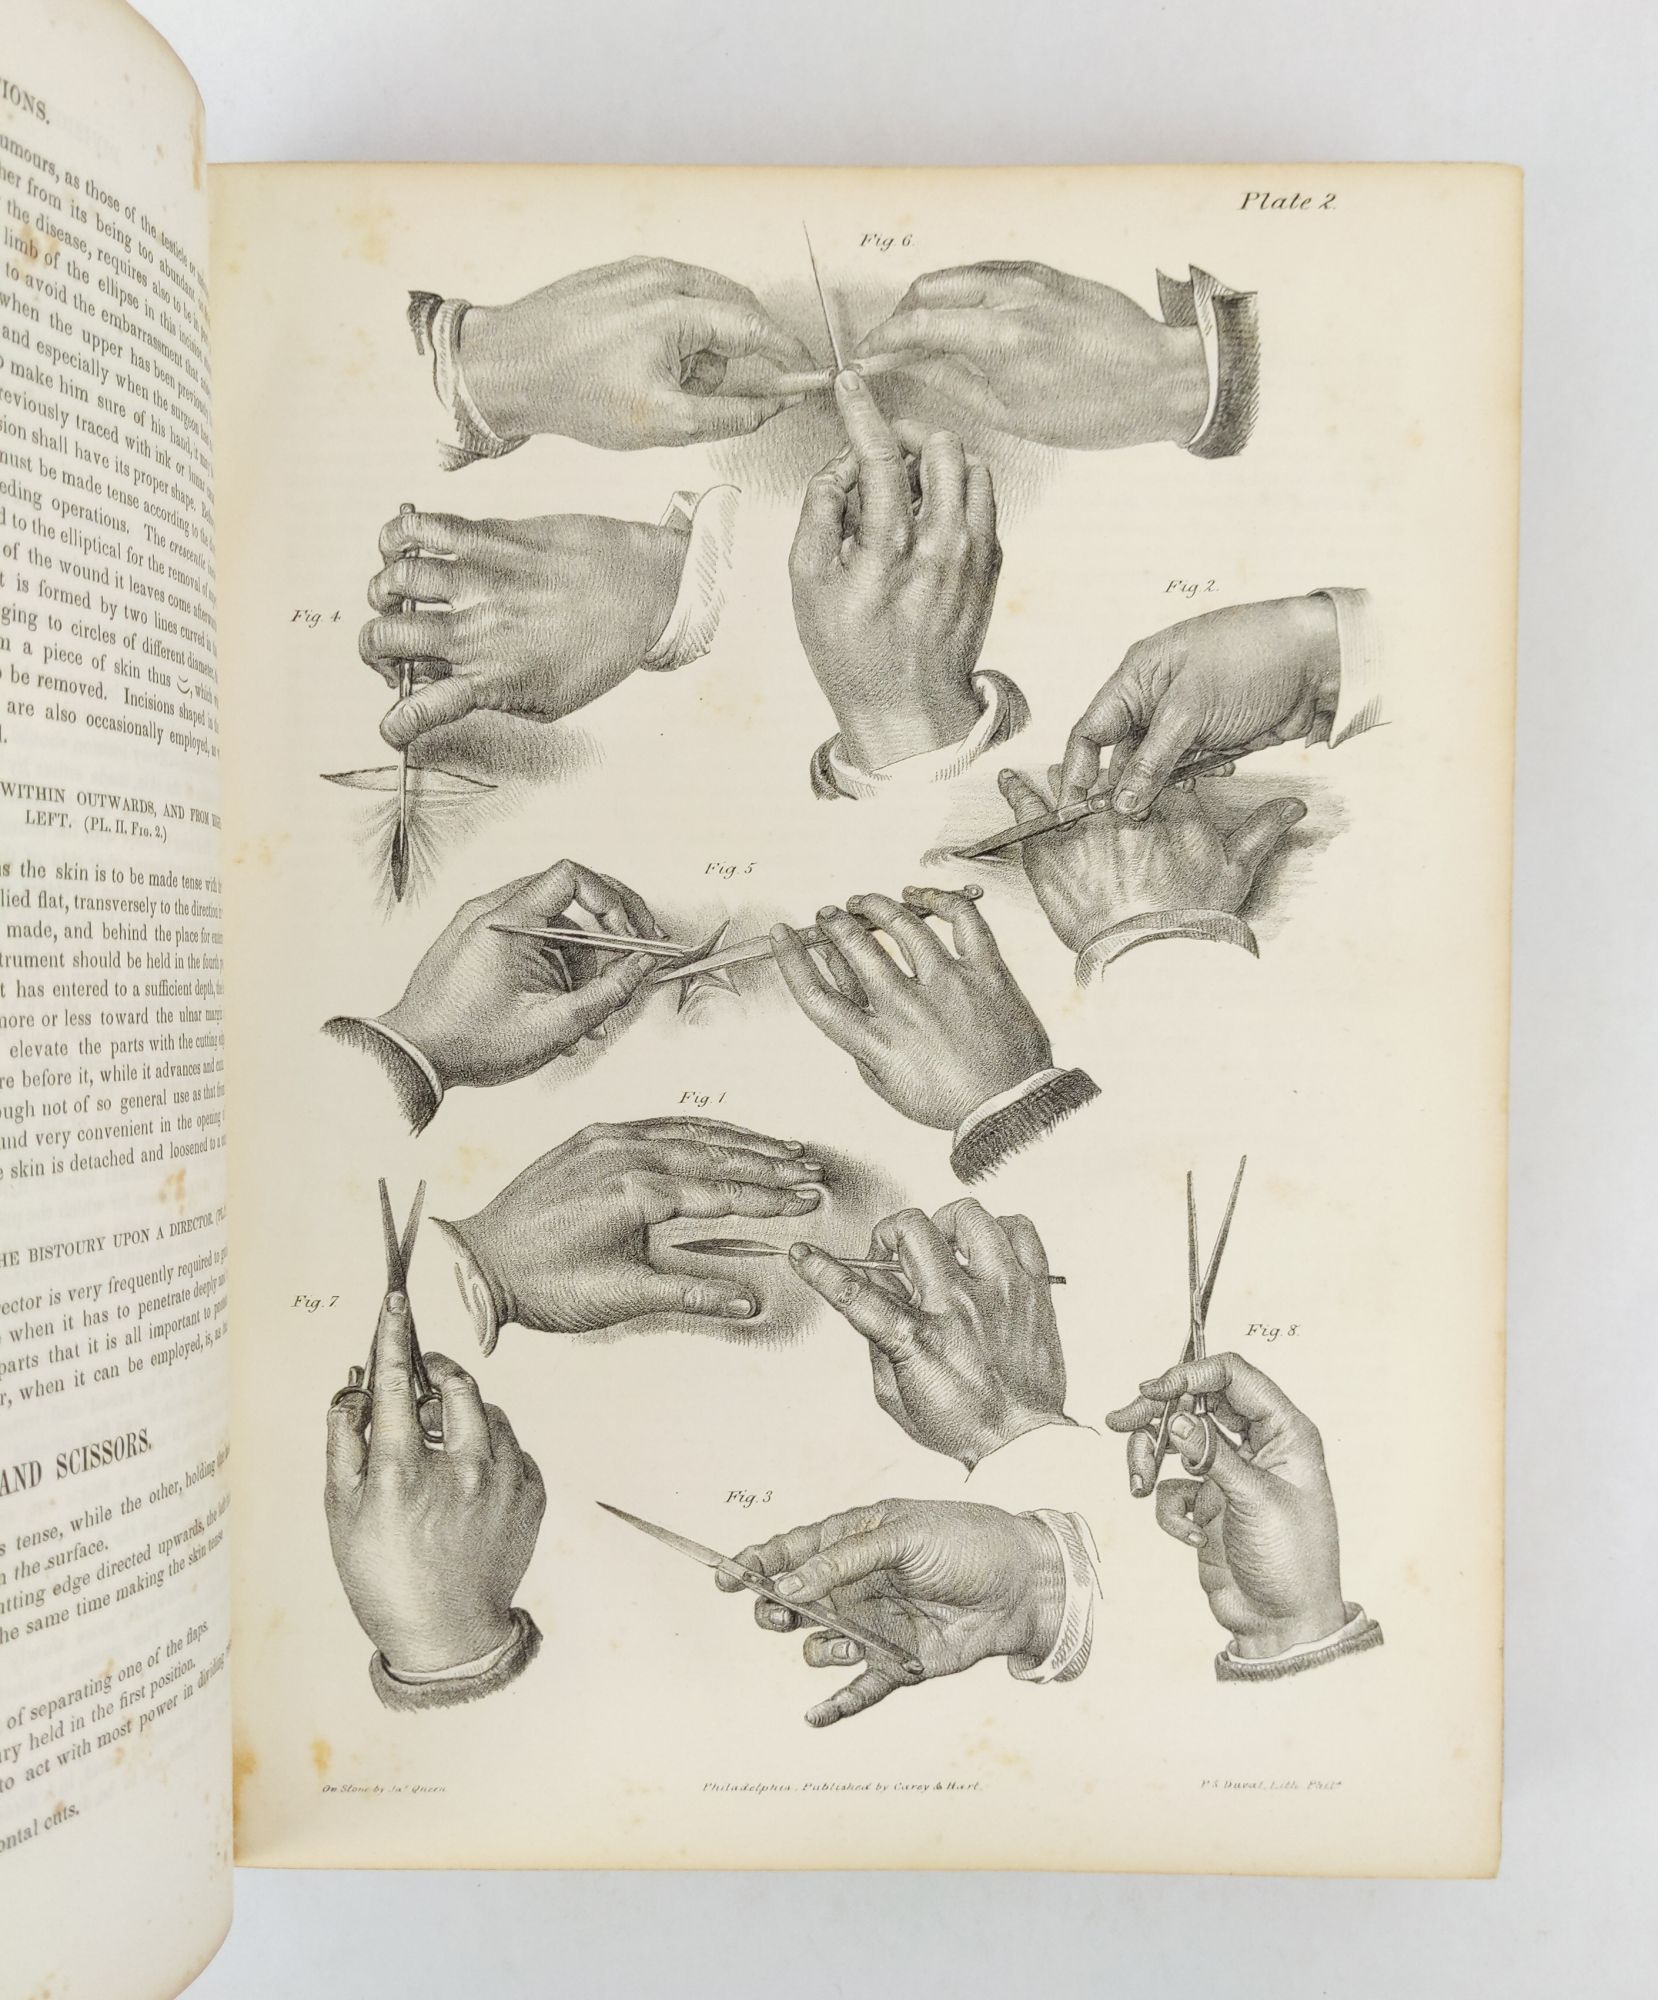 Product Image for A TREATISE ON OPERATIVE SURGERY; COMPRISING A DESCRIPTION OF THE VARIOUS PROCESSES OF THE ART, INCLUDING ALL THE NEW OPERATIONS ; EXHIBITING THE STATE OF SURGICAL SCIENCE IN ITS PRESENT ADVANCED CONDITION: WITH EIGHTY PLATES CONTAINING FOUR HUNDRED AND EI